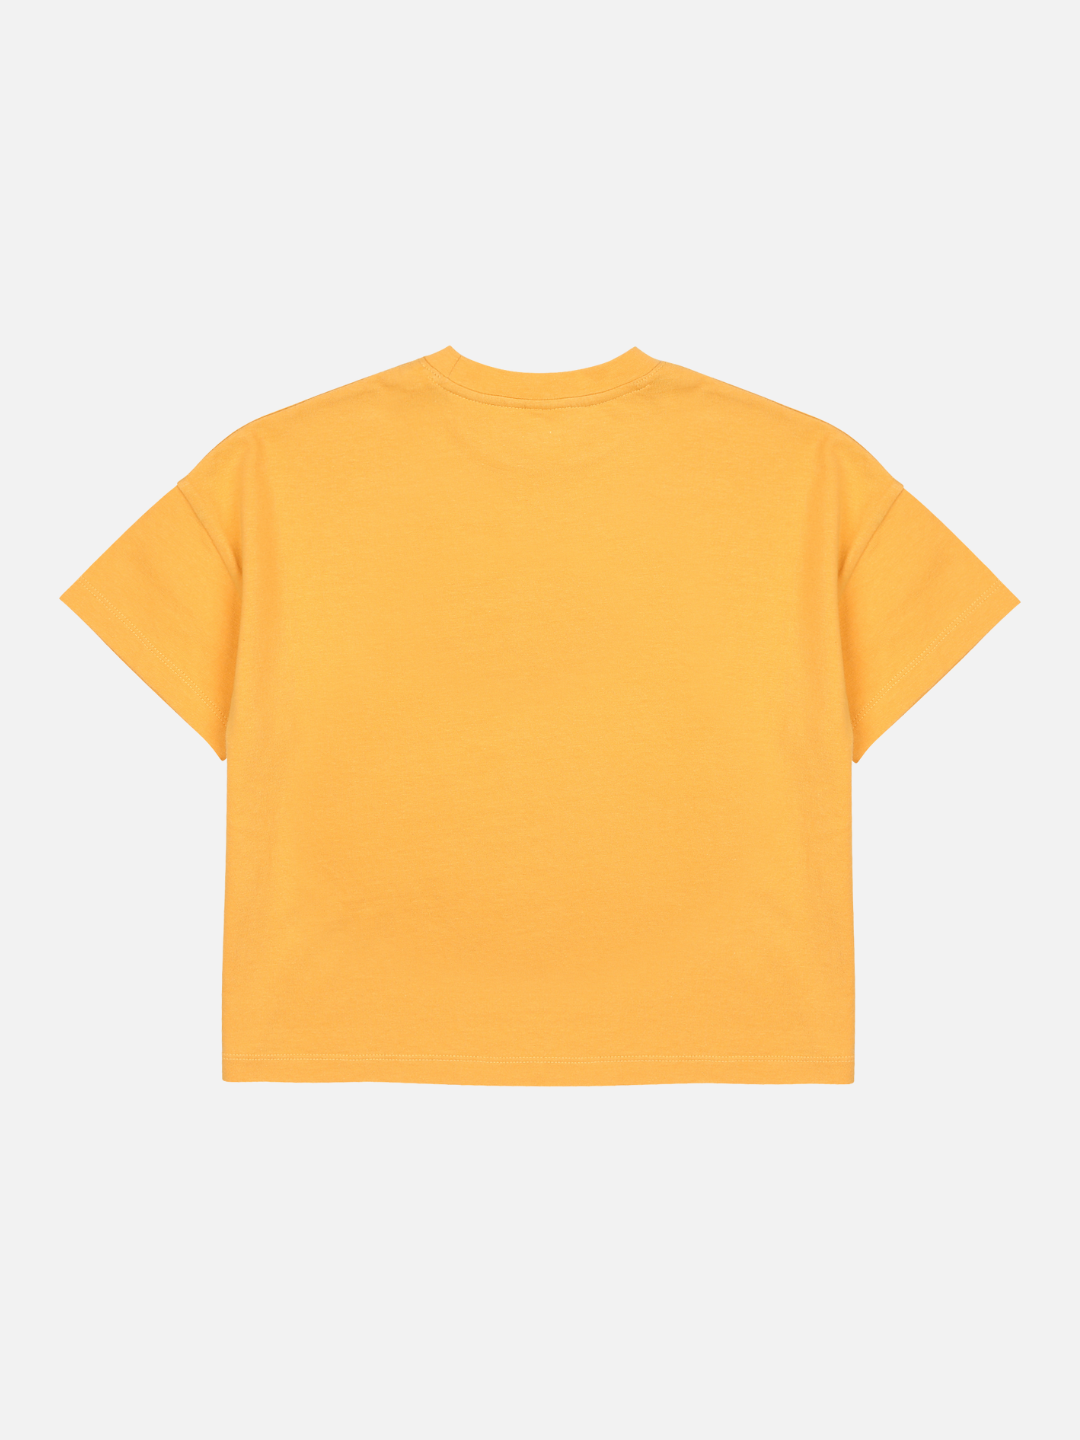 Yellow | Back of T-shirt with no design on a yellow background.